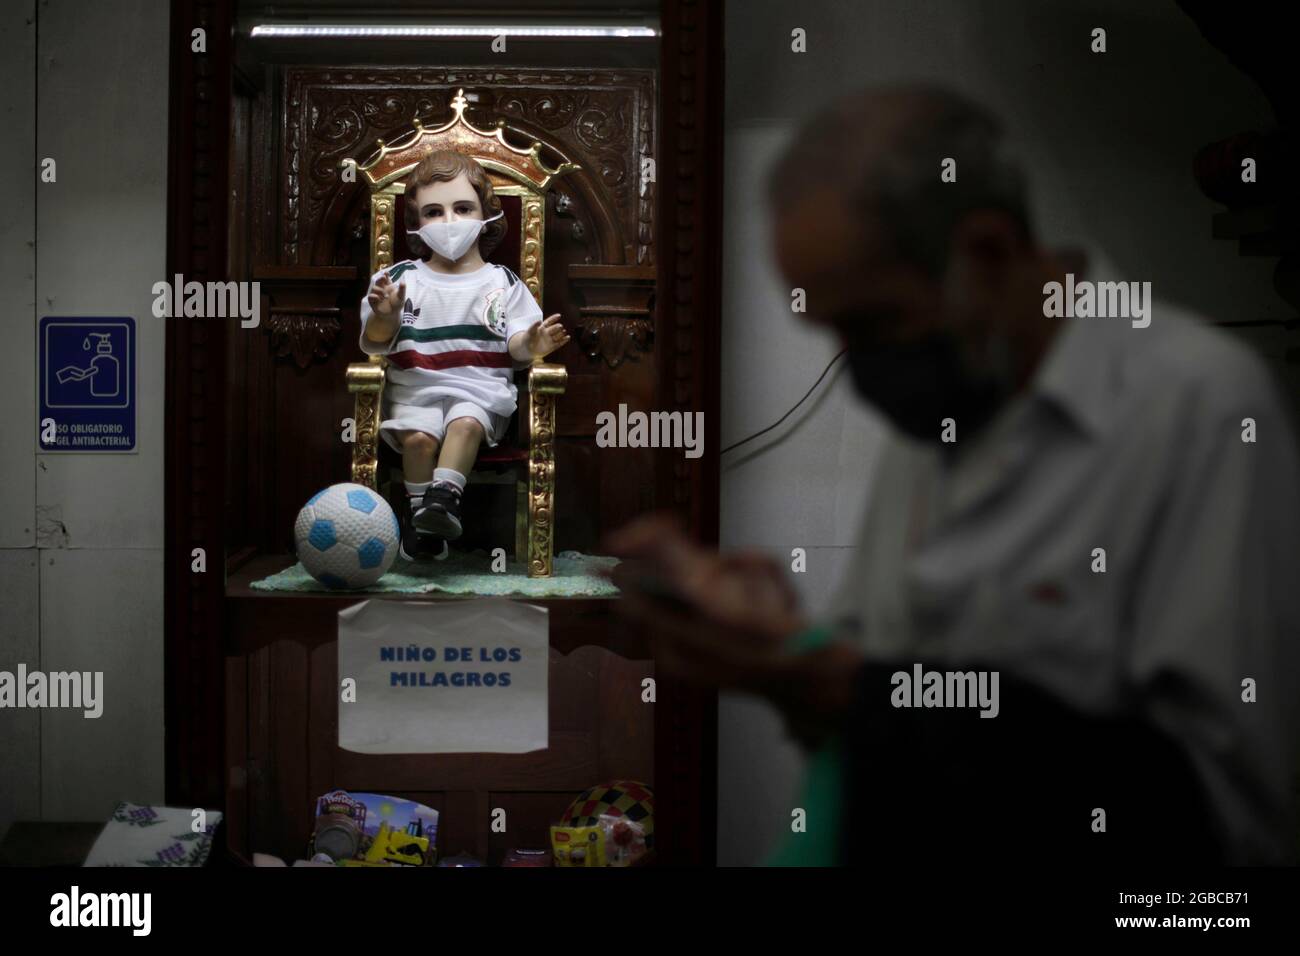 Non Exclusive: MEXICO CITY, MEXICO - AUGUST 1: A faithful  attends the Metropolitan Cathedral to pray to the holy 'Child of Miracles' so that the Mexi Stock Photo